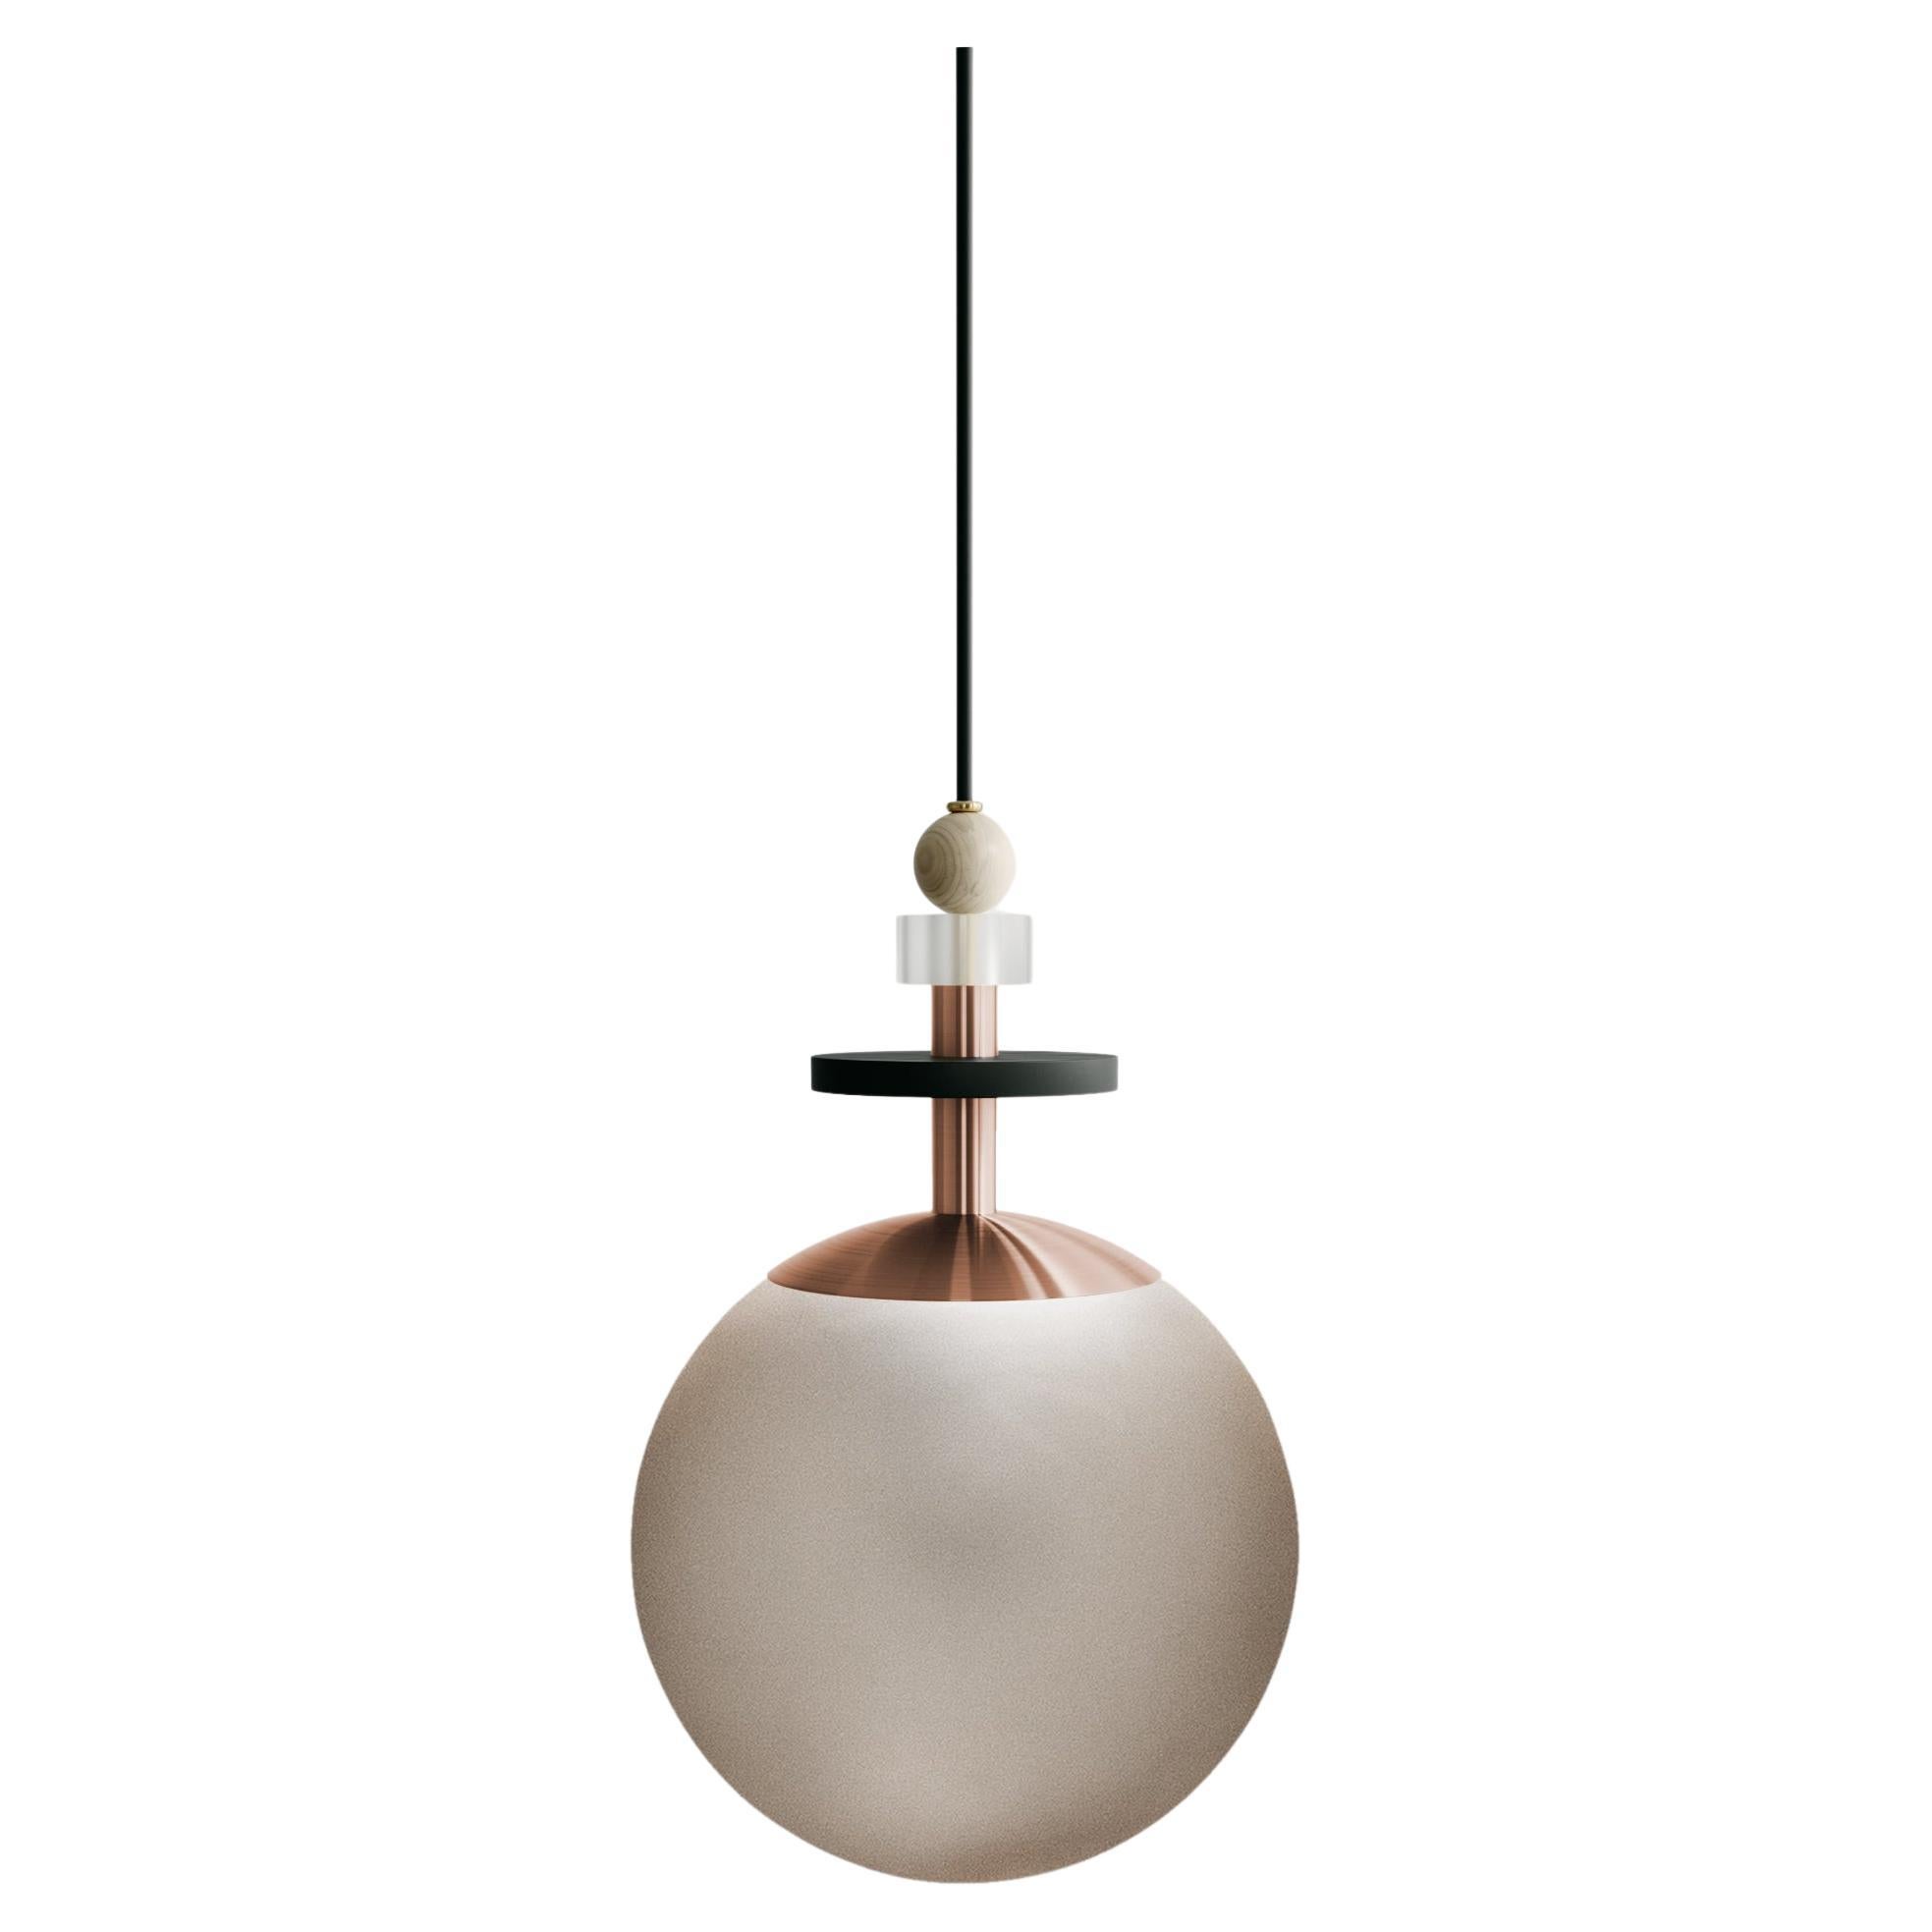 A collection of playful and versatile pendants that consider lighting as the 